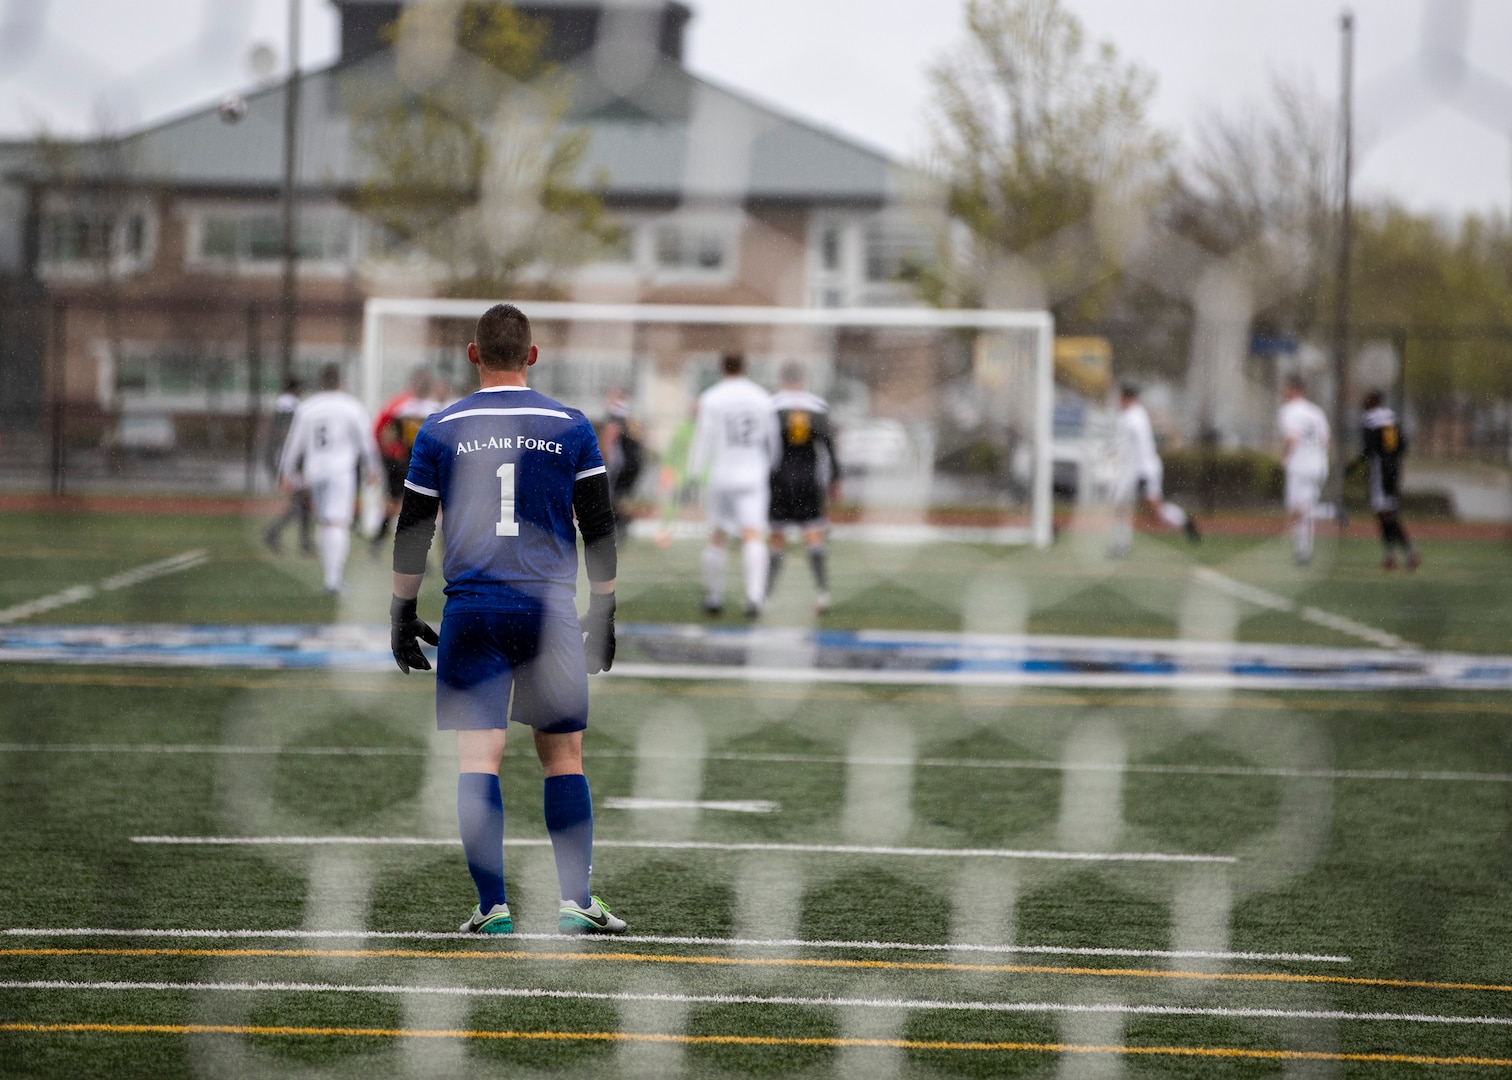 NAVAL STATION EVERETT, Wa. (April 14, 2019) - Airman 1st Class Benjamin Lockler, stationed at Grand Forks, ND. watches as his Air Force team competes agains the Army team during the first round of the Armed Forces Sports Men’s Soccer Championship hosted at Naval Station Everett. (U.S. Navy Photo by Mass Communication Specialist 2nd Class Ian Carver/RELEASED).  190414-N-XK513-1151